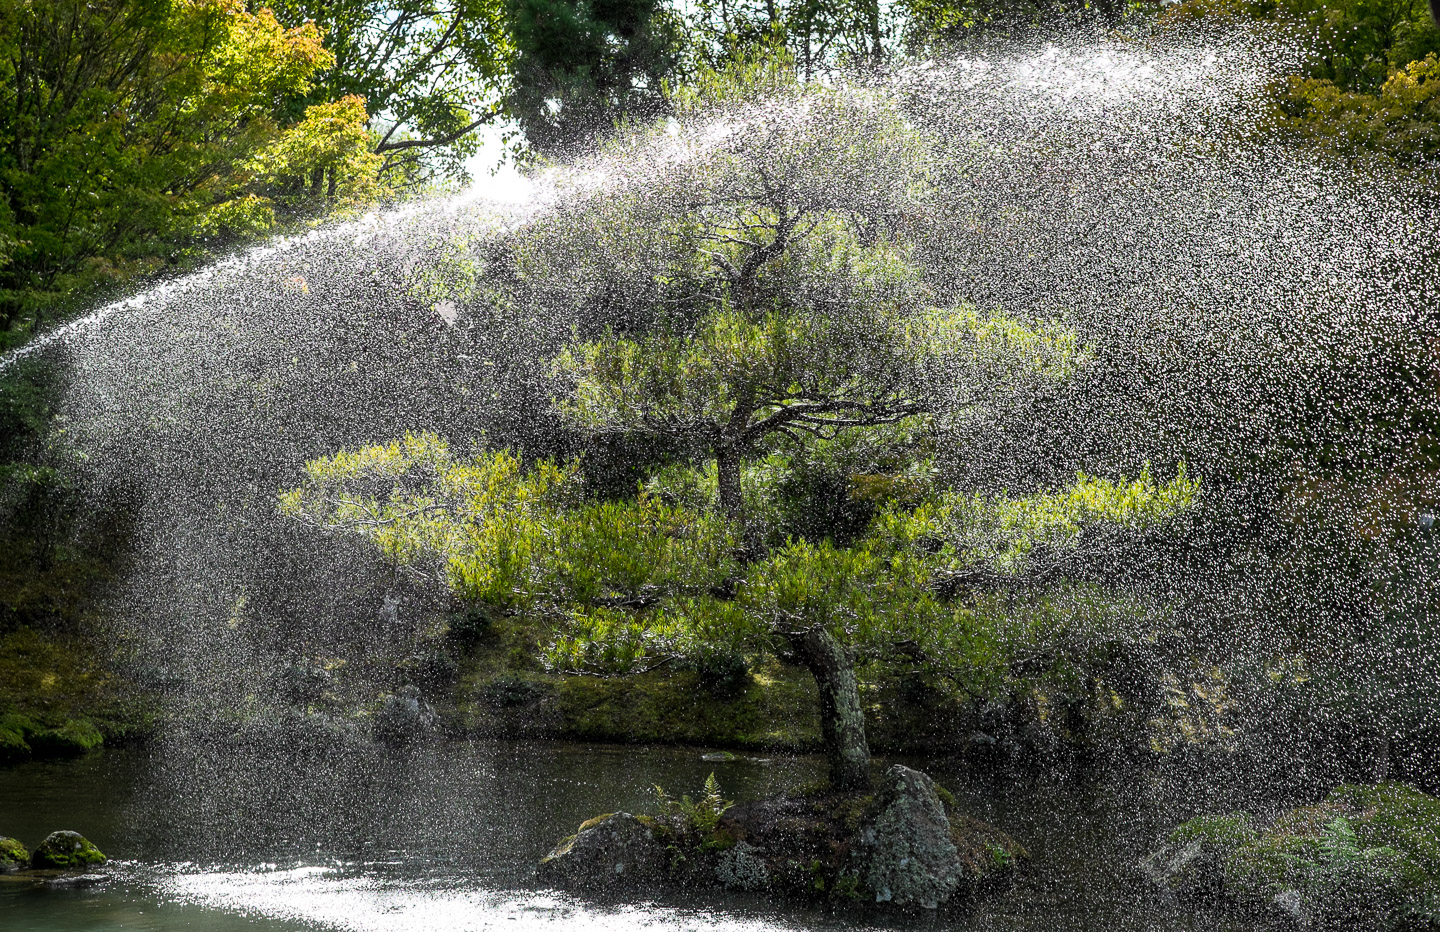 Watering a tree in the Japanese Garden of Contemplation